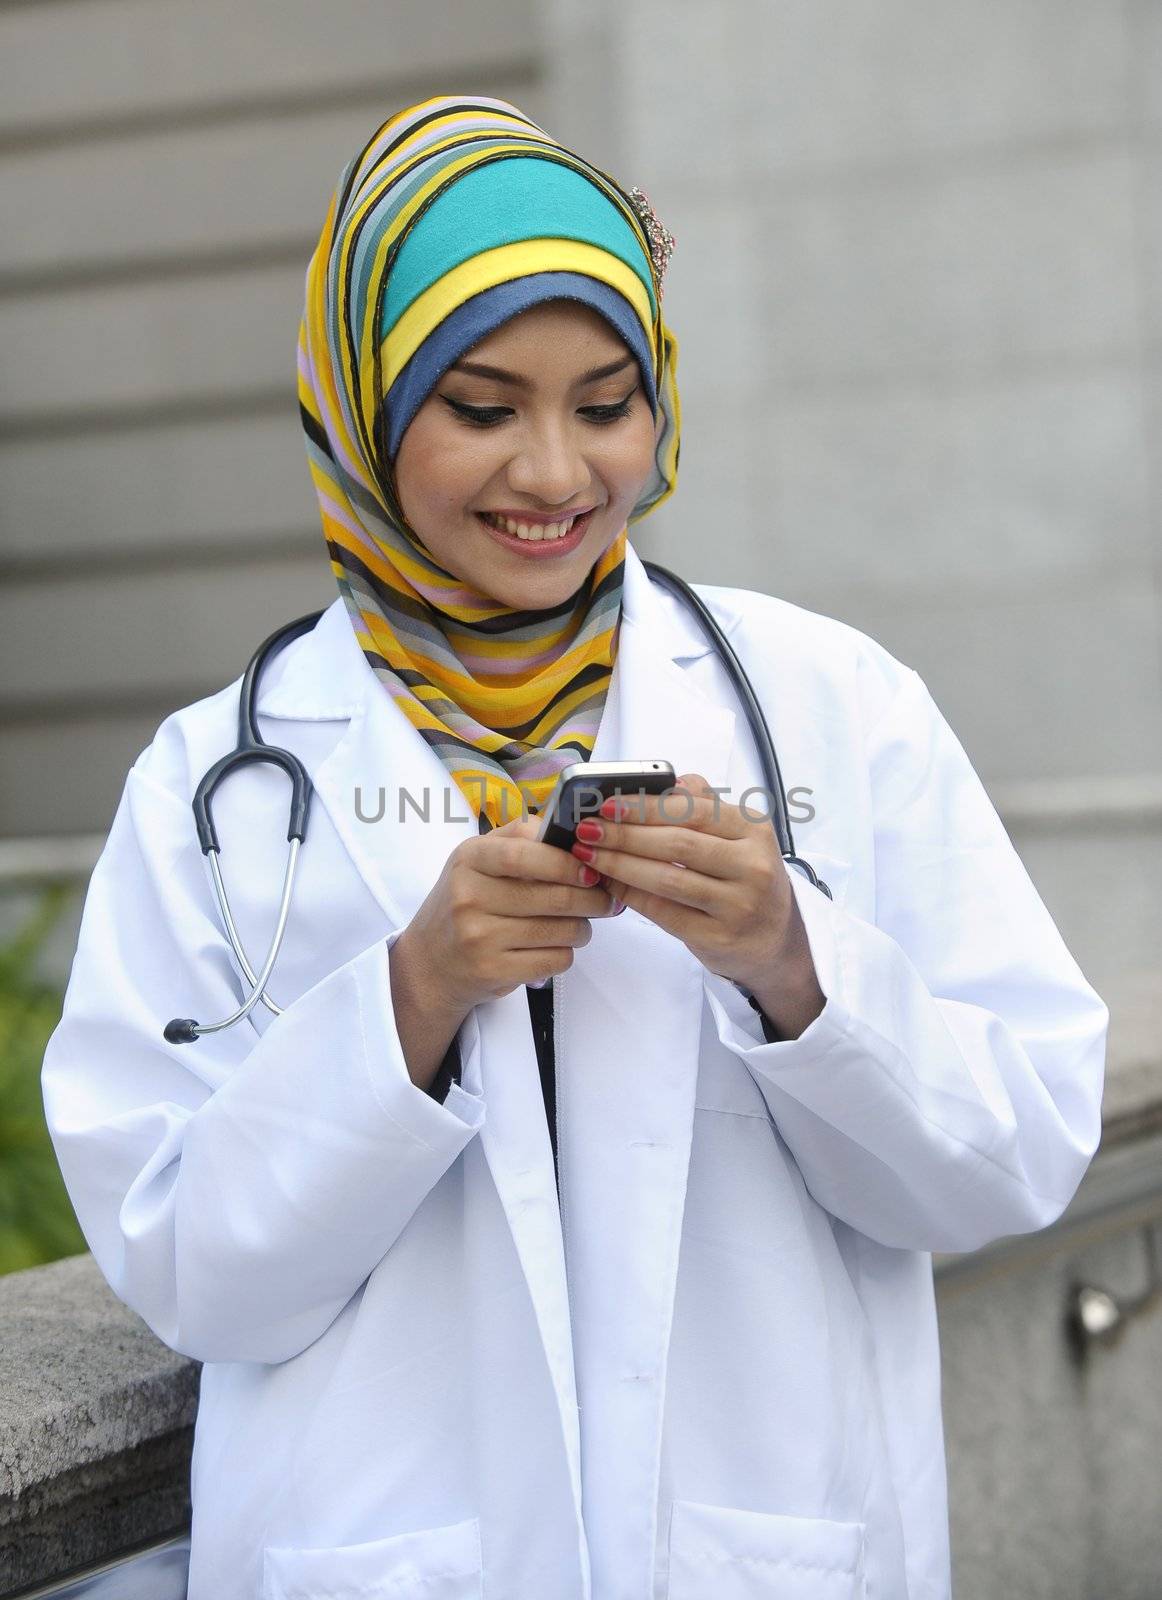 Women Doctor With Scarf use smart phone by jaggat